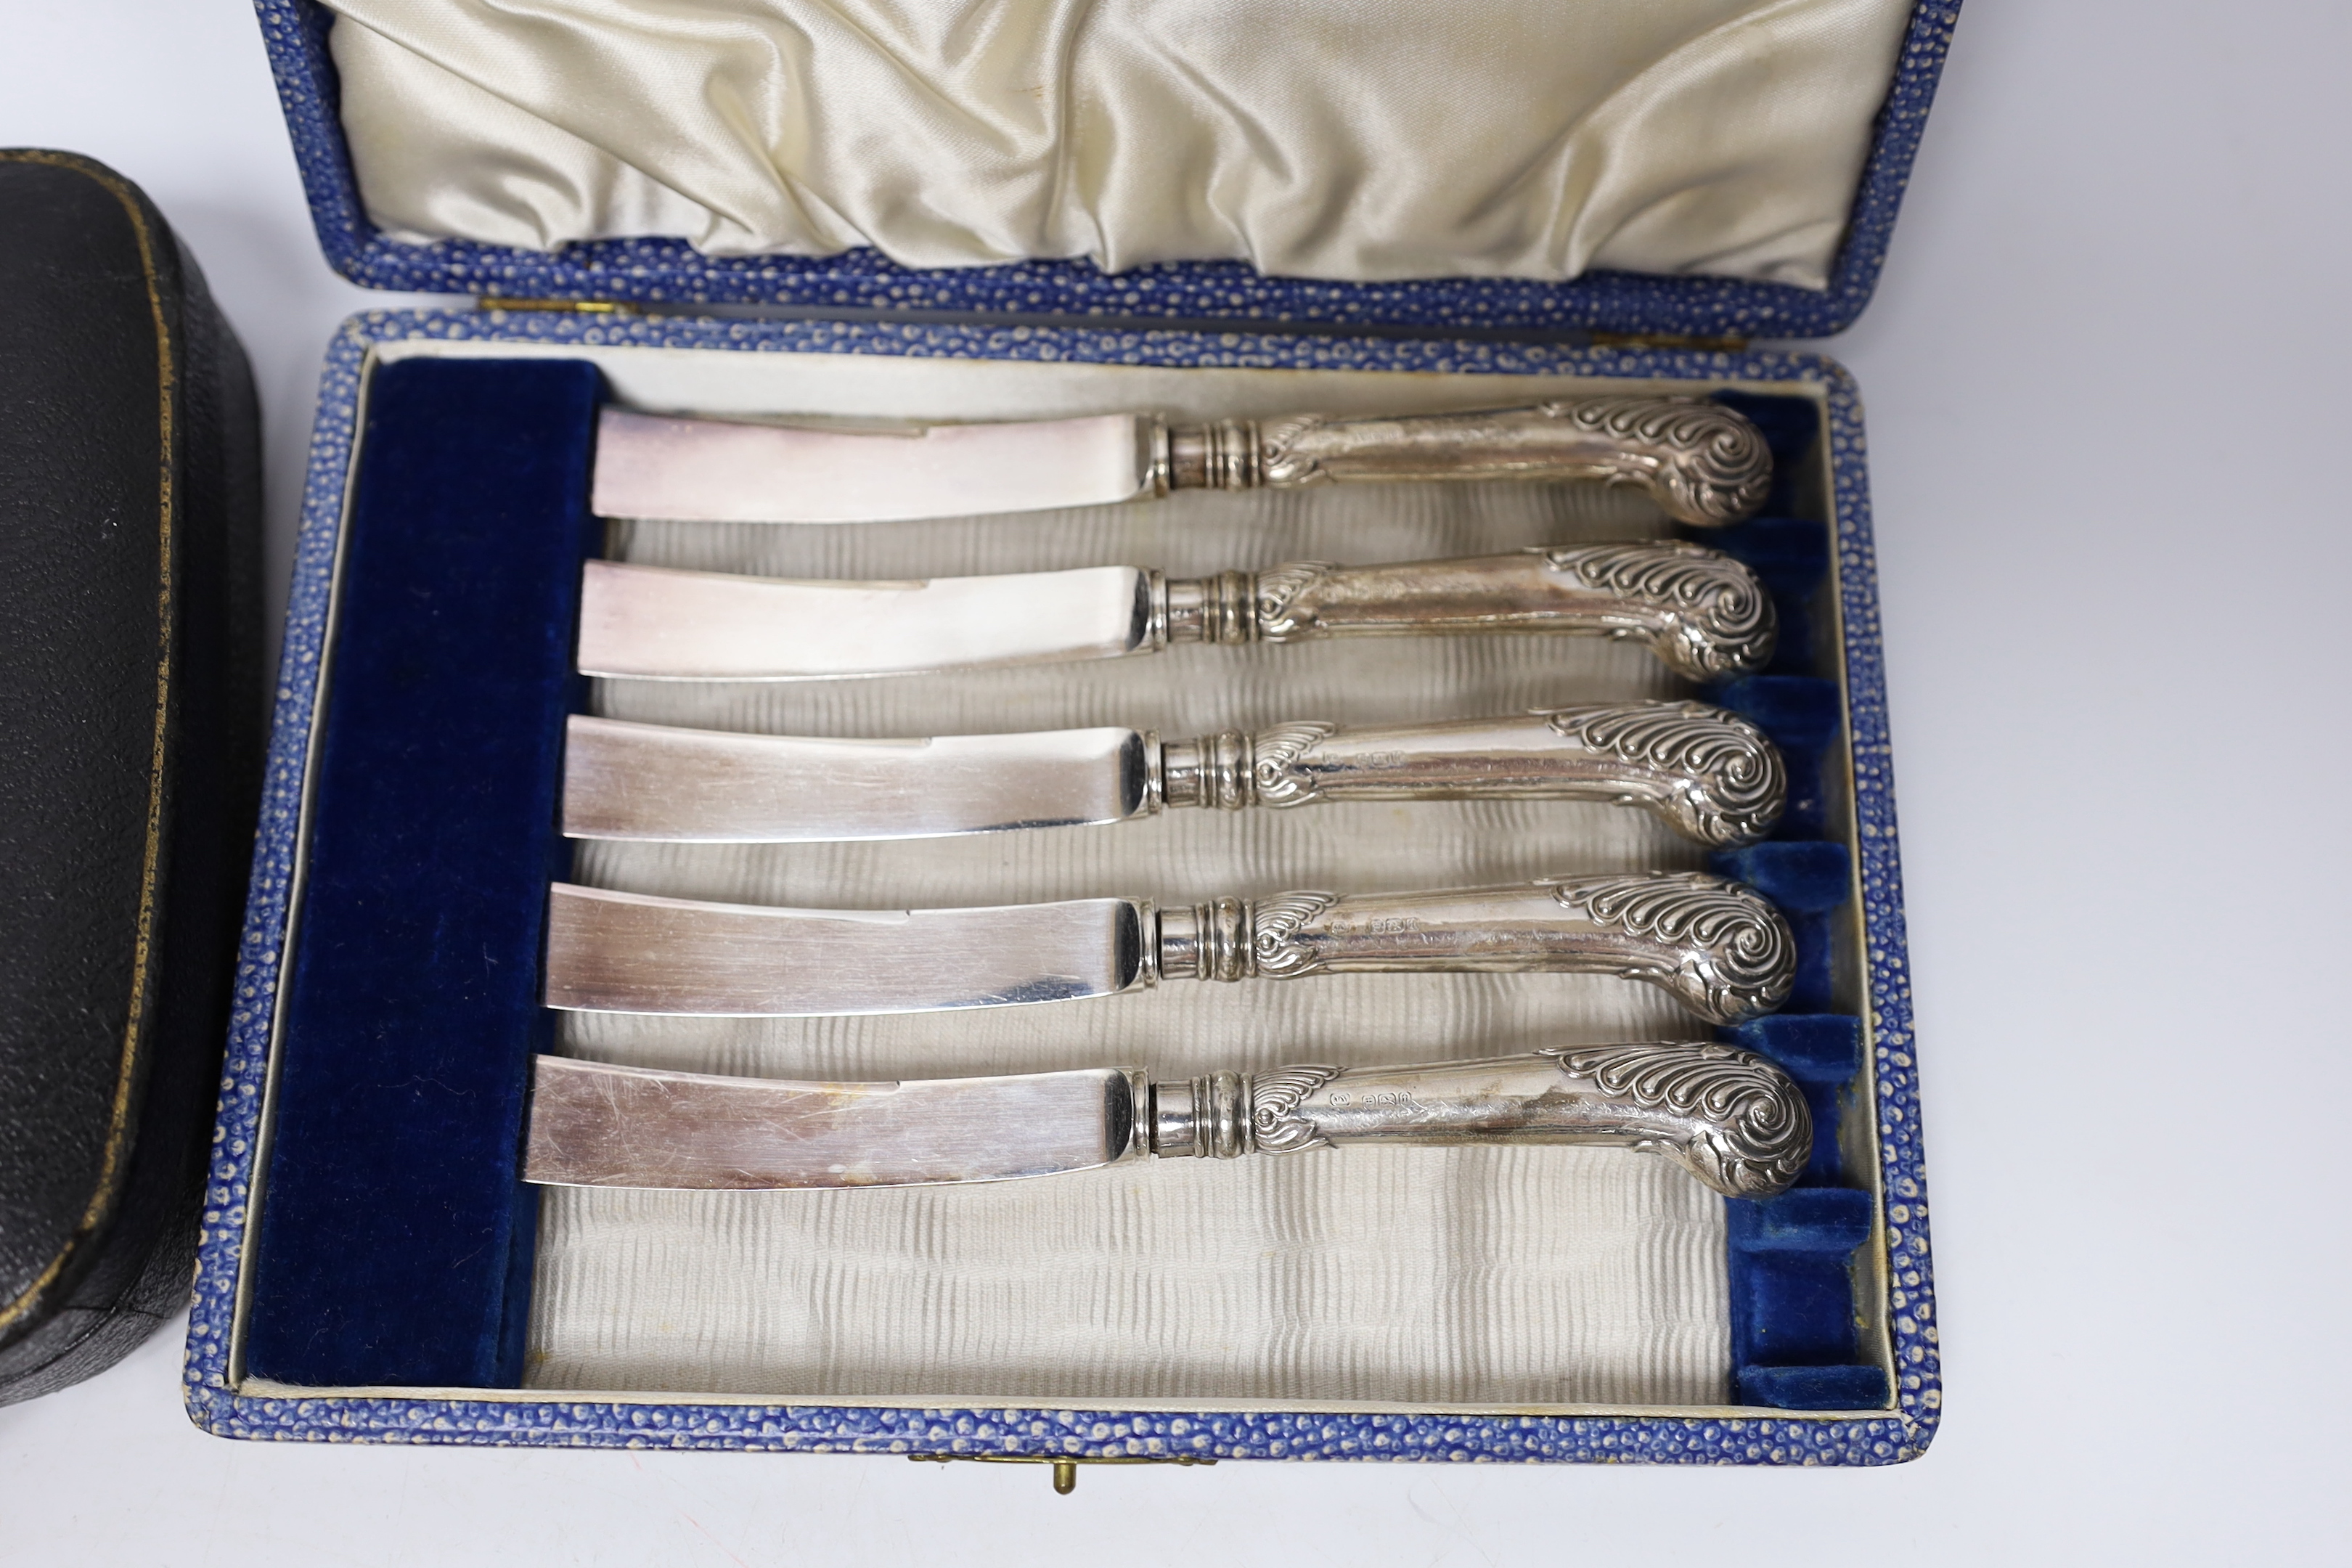 Six pairs of German Art Nouveau 800 standard white metal handled dessert eaters and two cased sets of six silver handled tea knives(one knife missing).